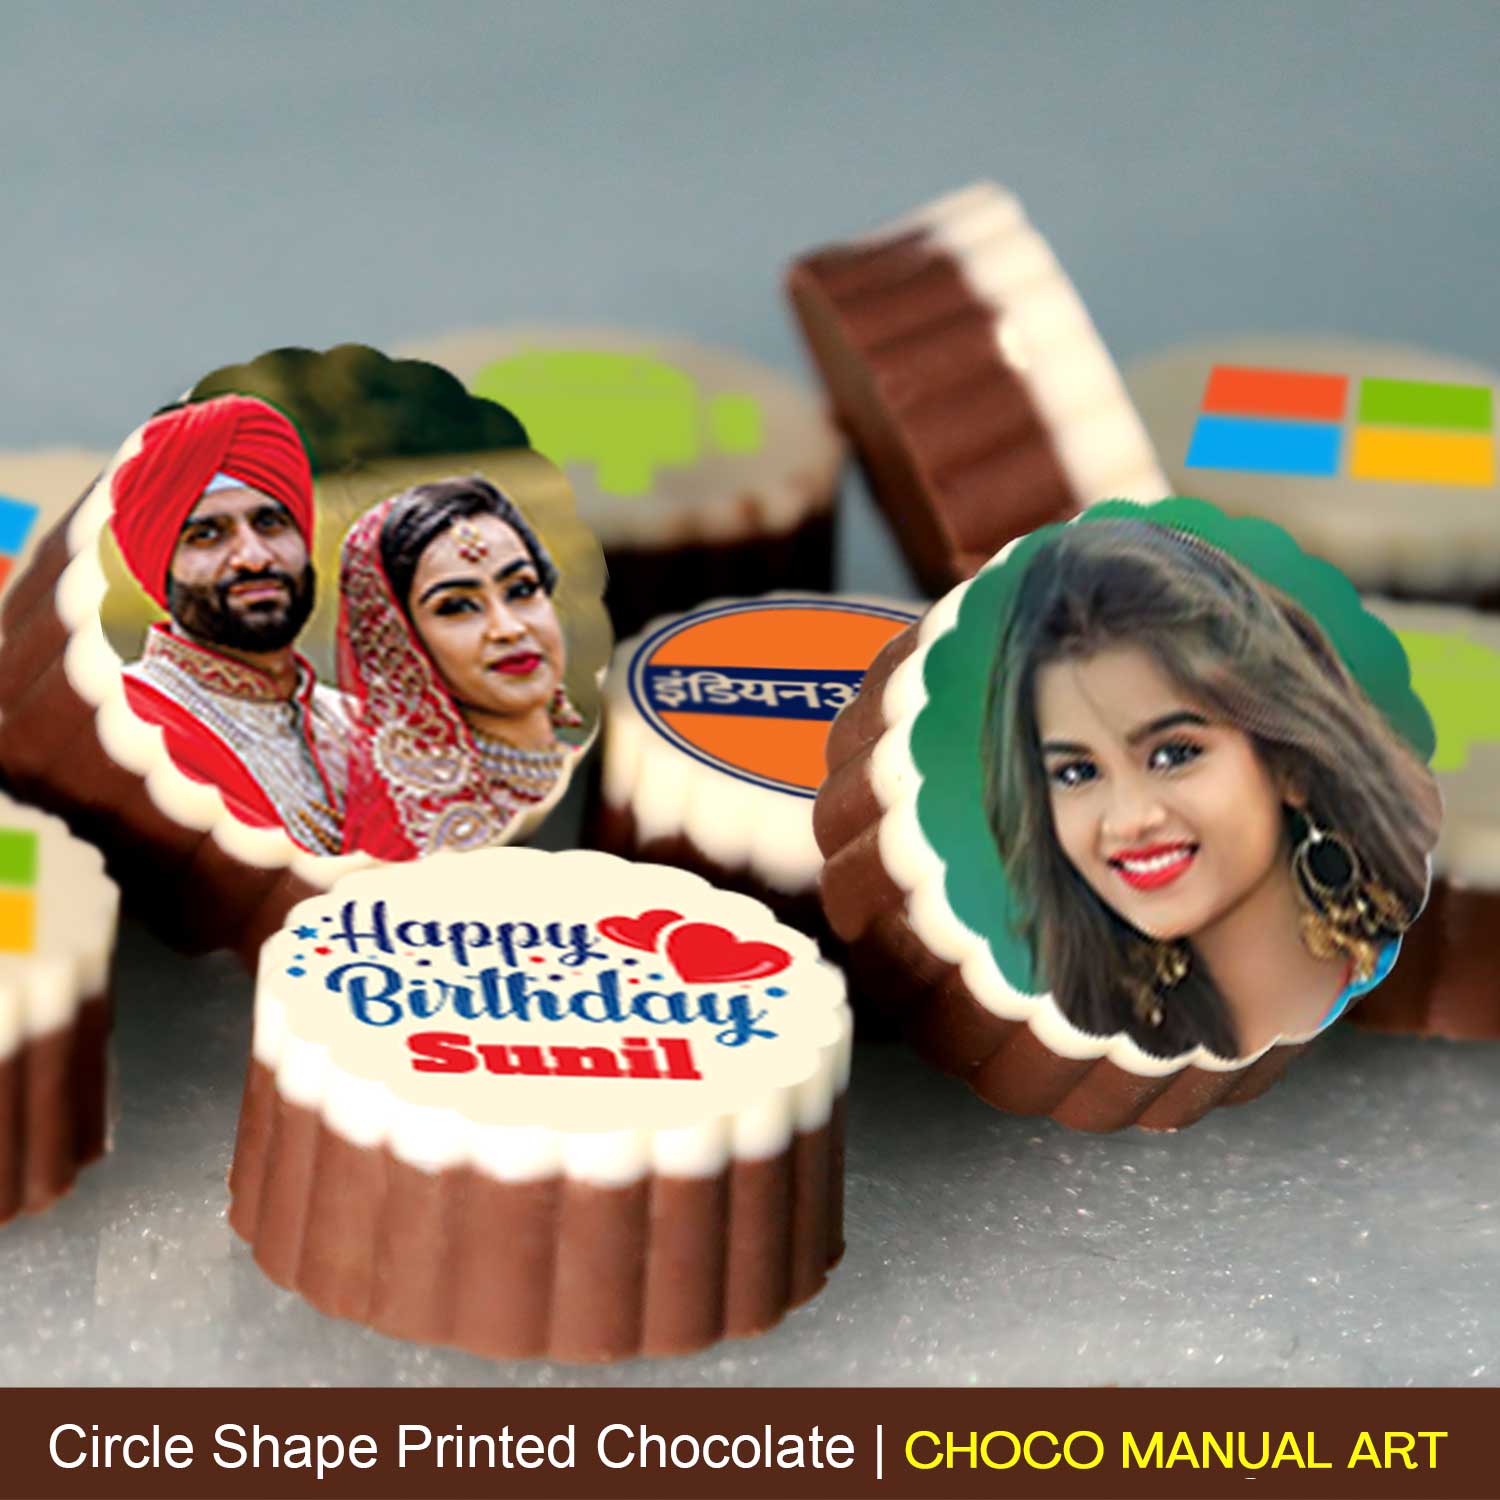  personalised chocolates with names personalised chocolates with photo customized chocolate box near me personalised chocolates with photo india customised chocolates near me personalised chocolate gift box personalized chocolates for birthday personalized chocolate gifts